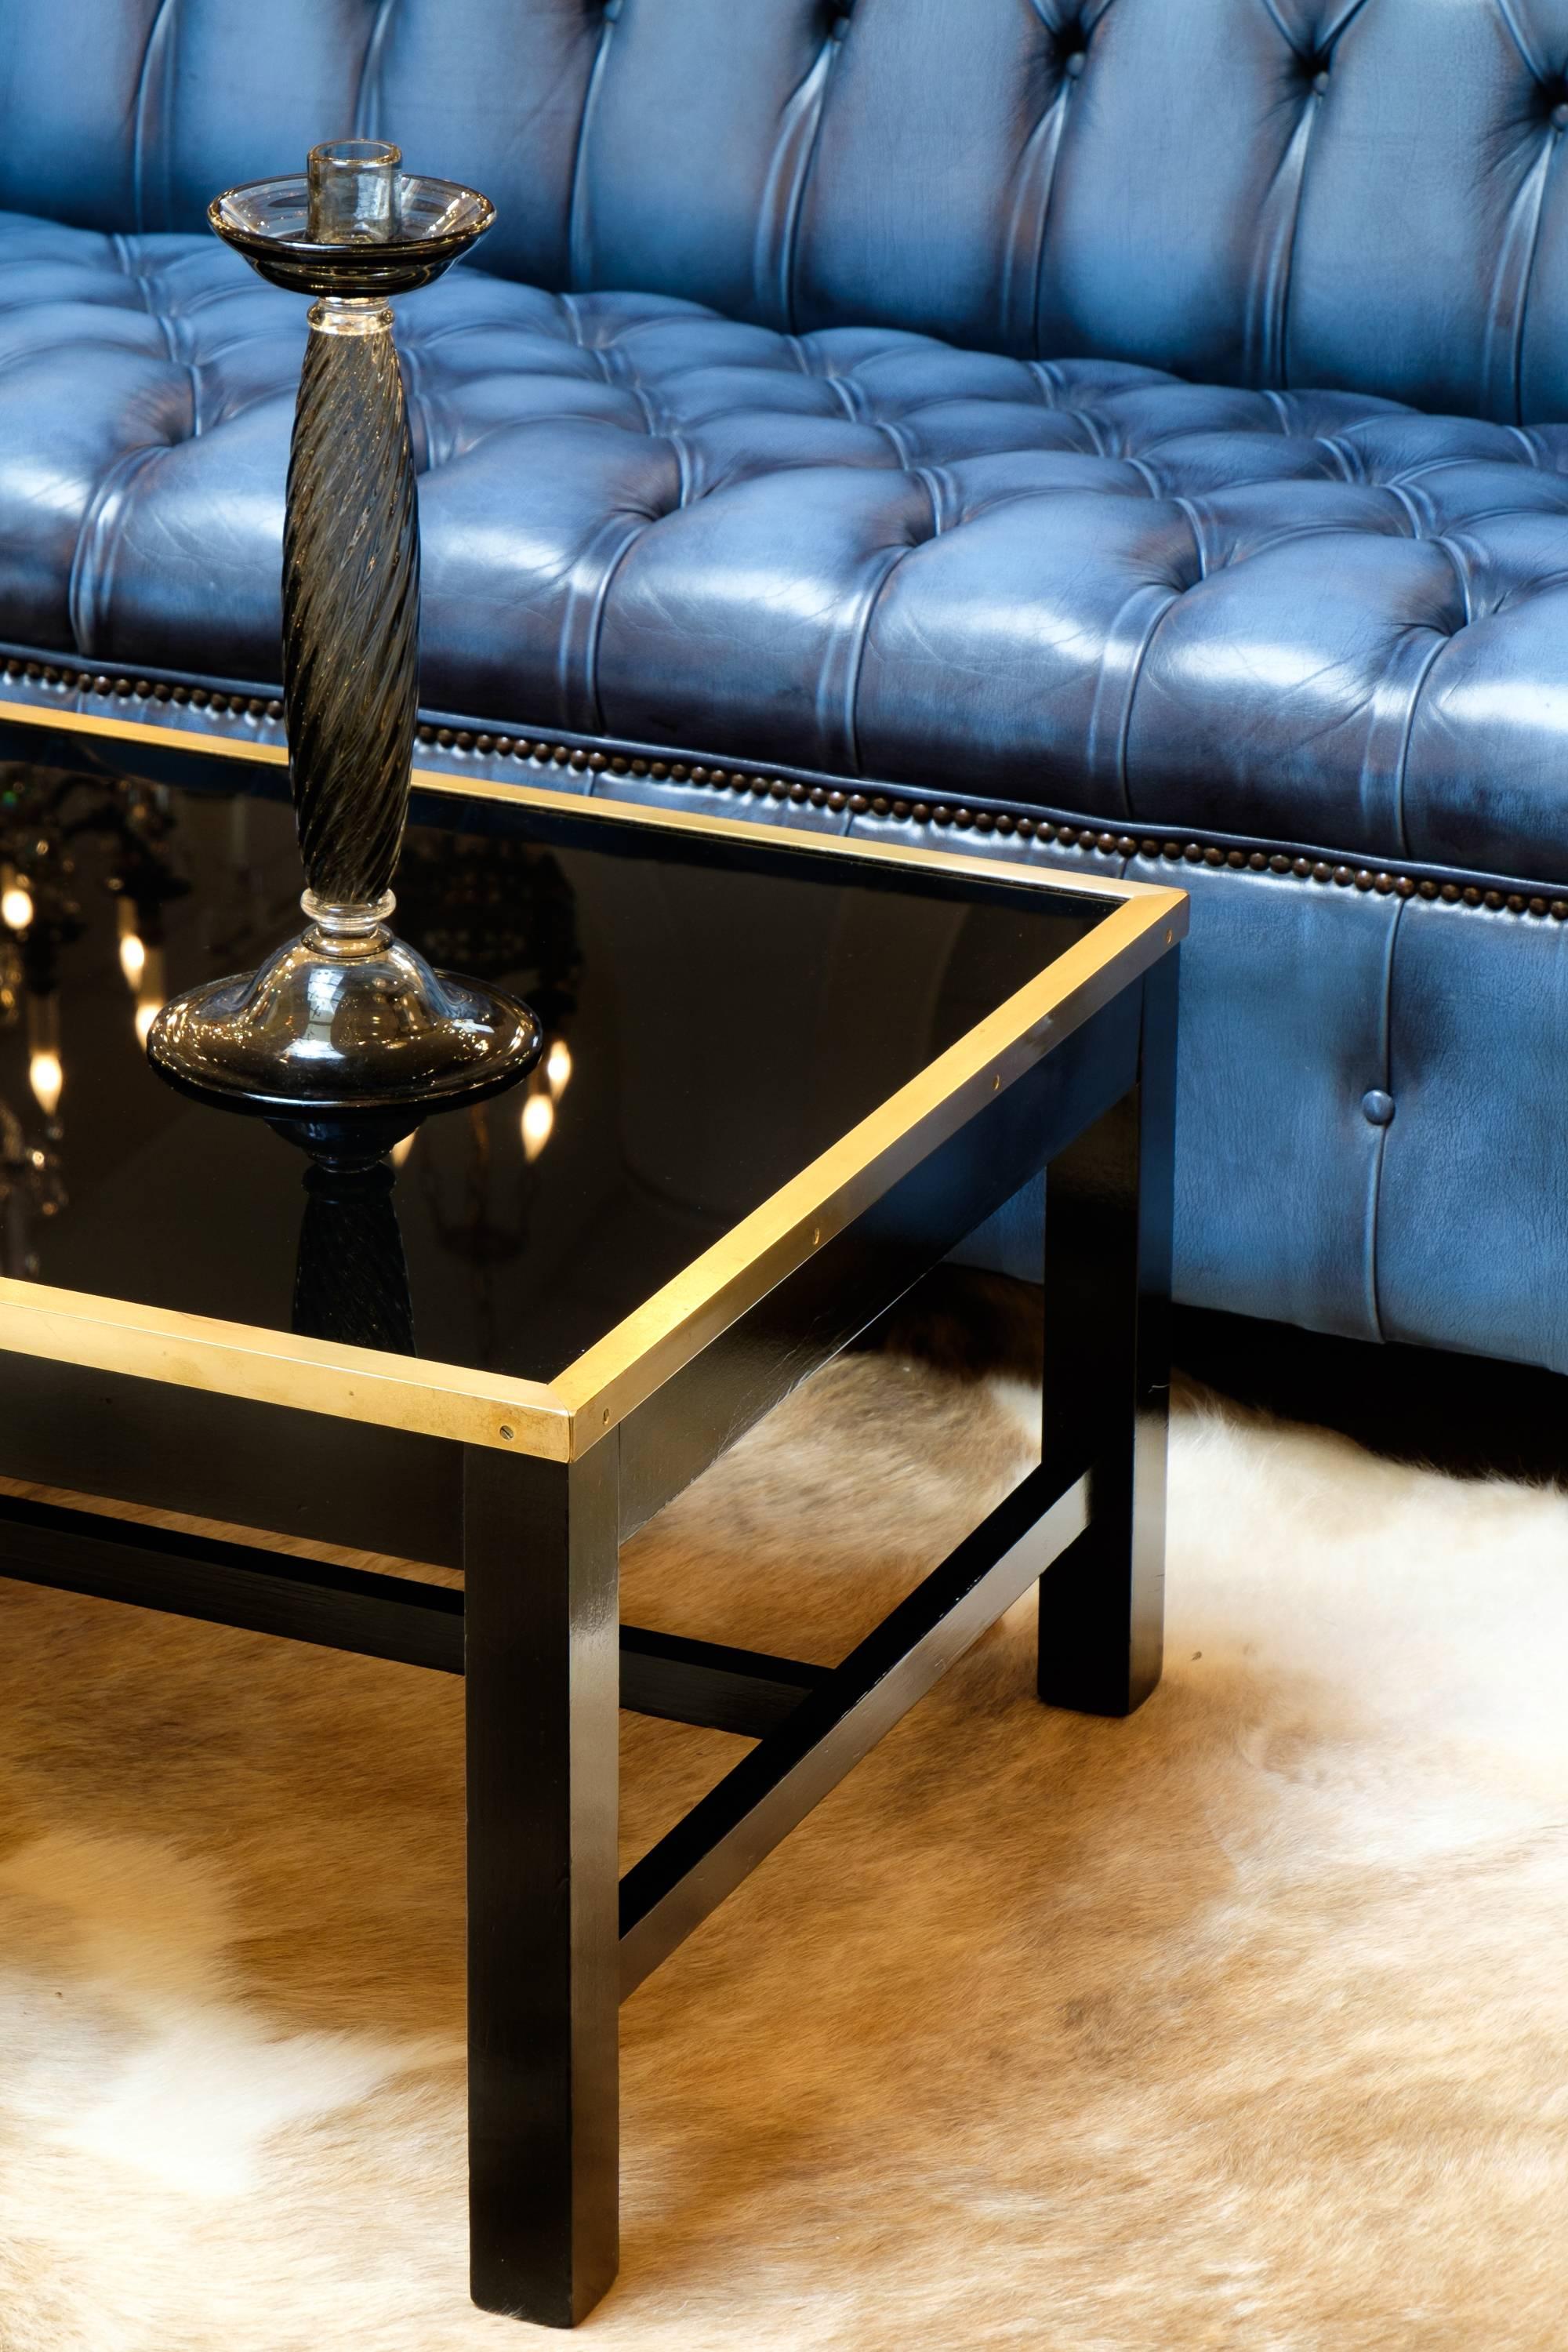 French vintage coffee table with a black glass top encased in brass, ebonized wood frame with a lustrous French polish finish. Clean lines and the finest craftsmanship really make this piece a keeper.